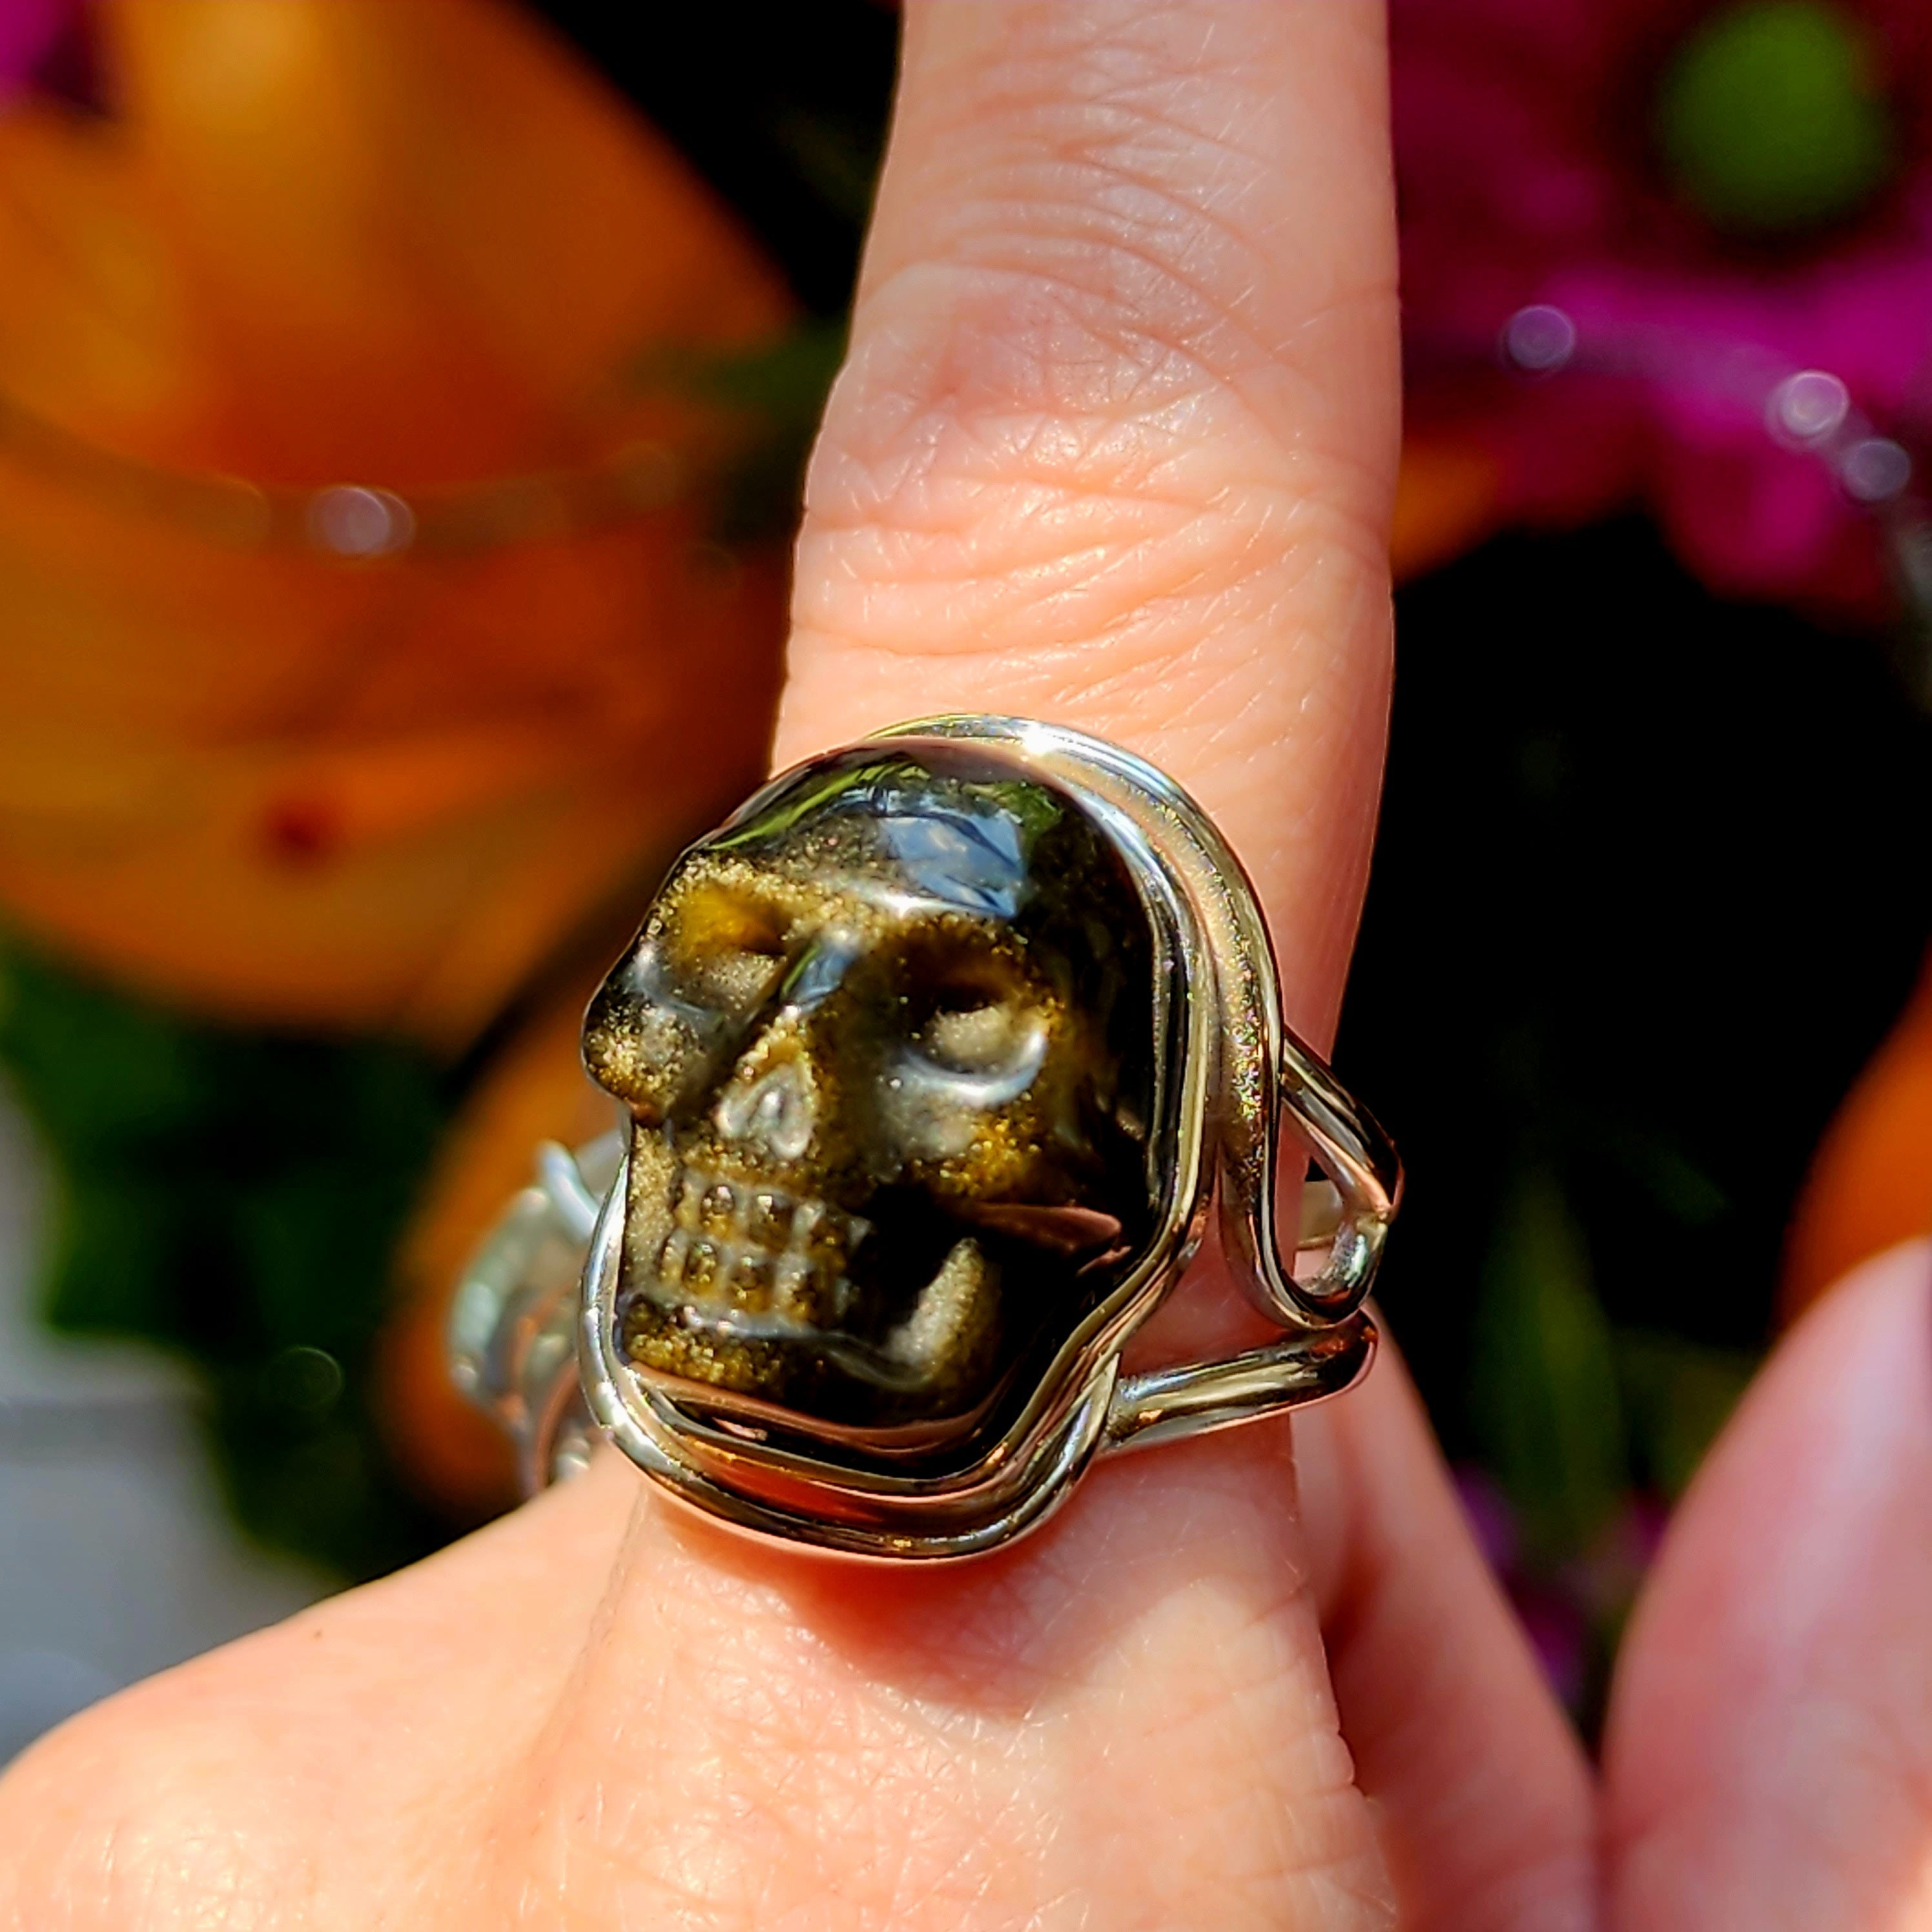 Gold Sheen Obsidian Skull Finger Cuff Adjustable Ring .925 Silver for Powerful Protection and Rising Above Negative Vibes